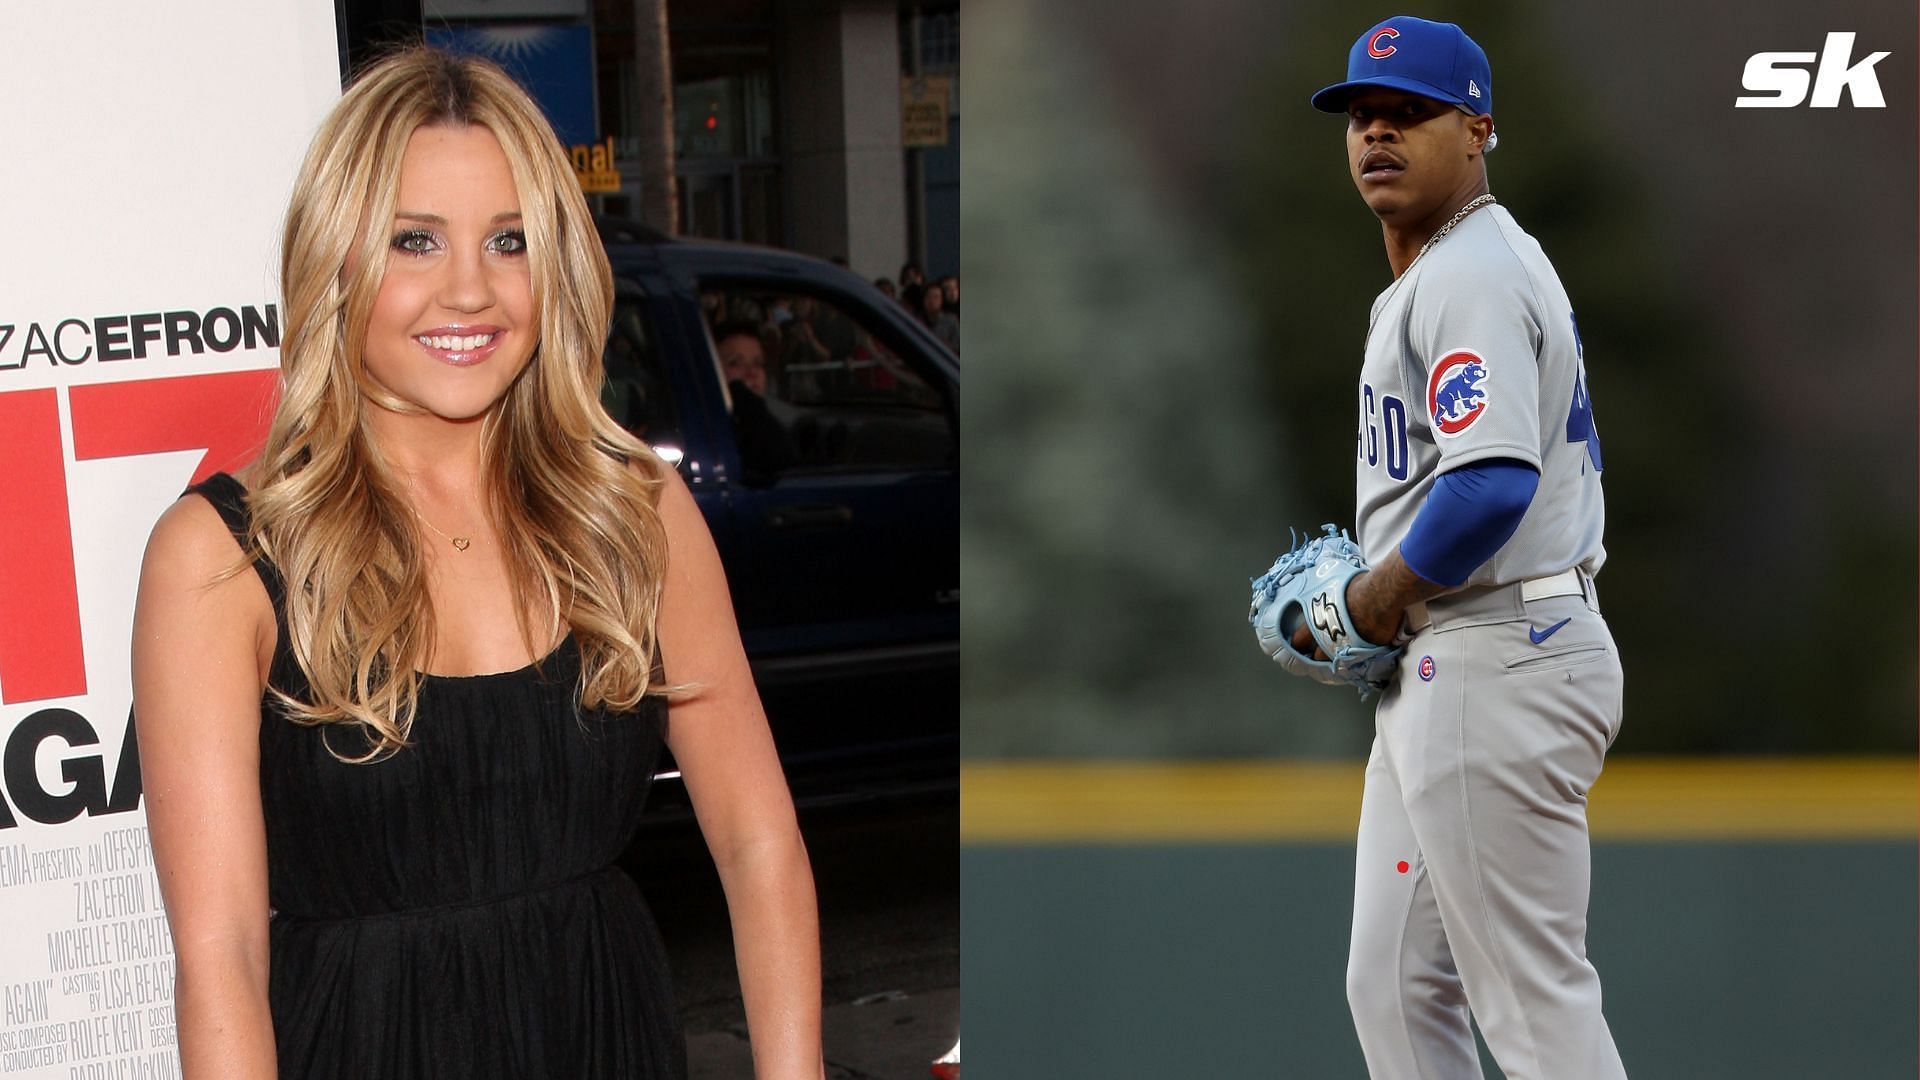 Amanda Byne gave a helping hand to MLB pitcher Marcus Stroman on a Nickelodeon game show